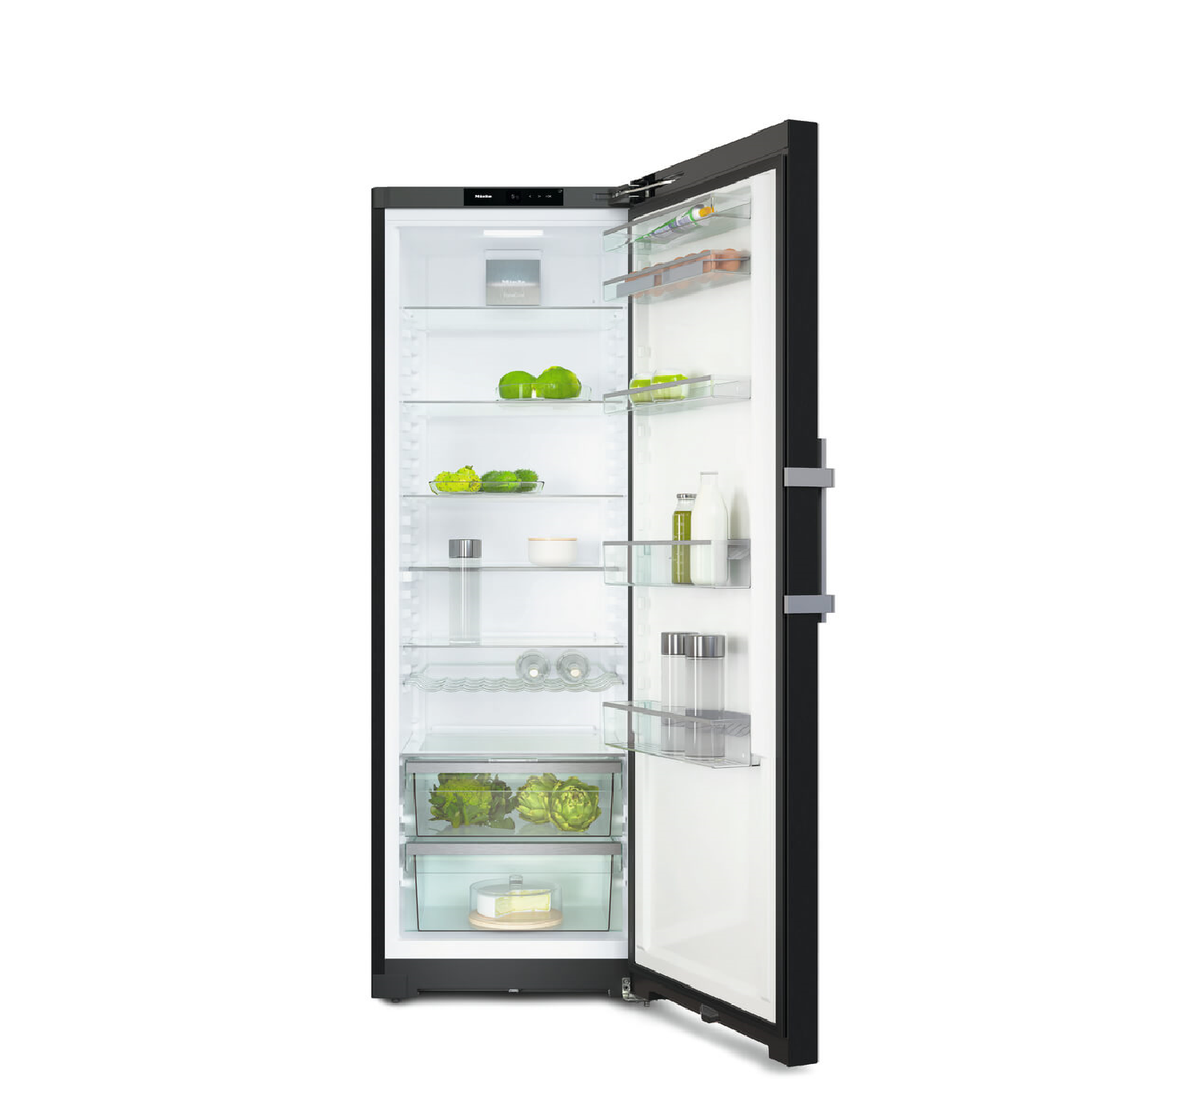 Freestanding refrigerator , DailyFresh perfect side-by-side combination.